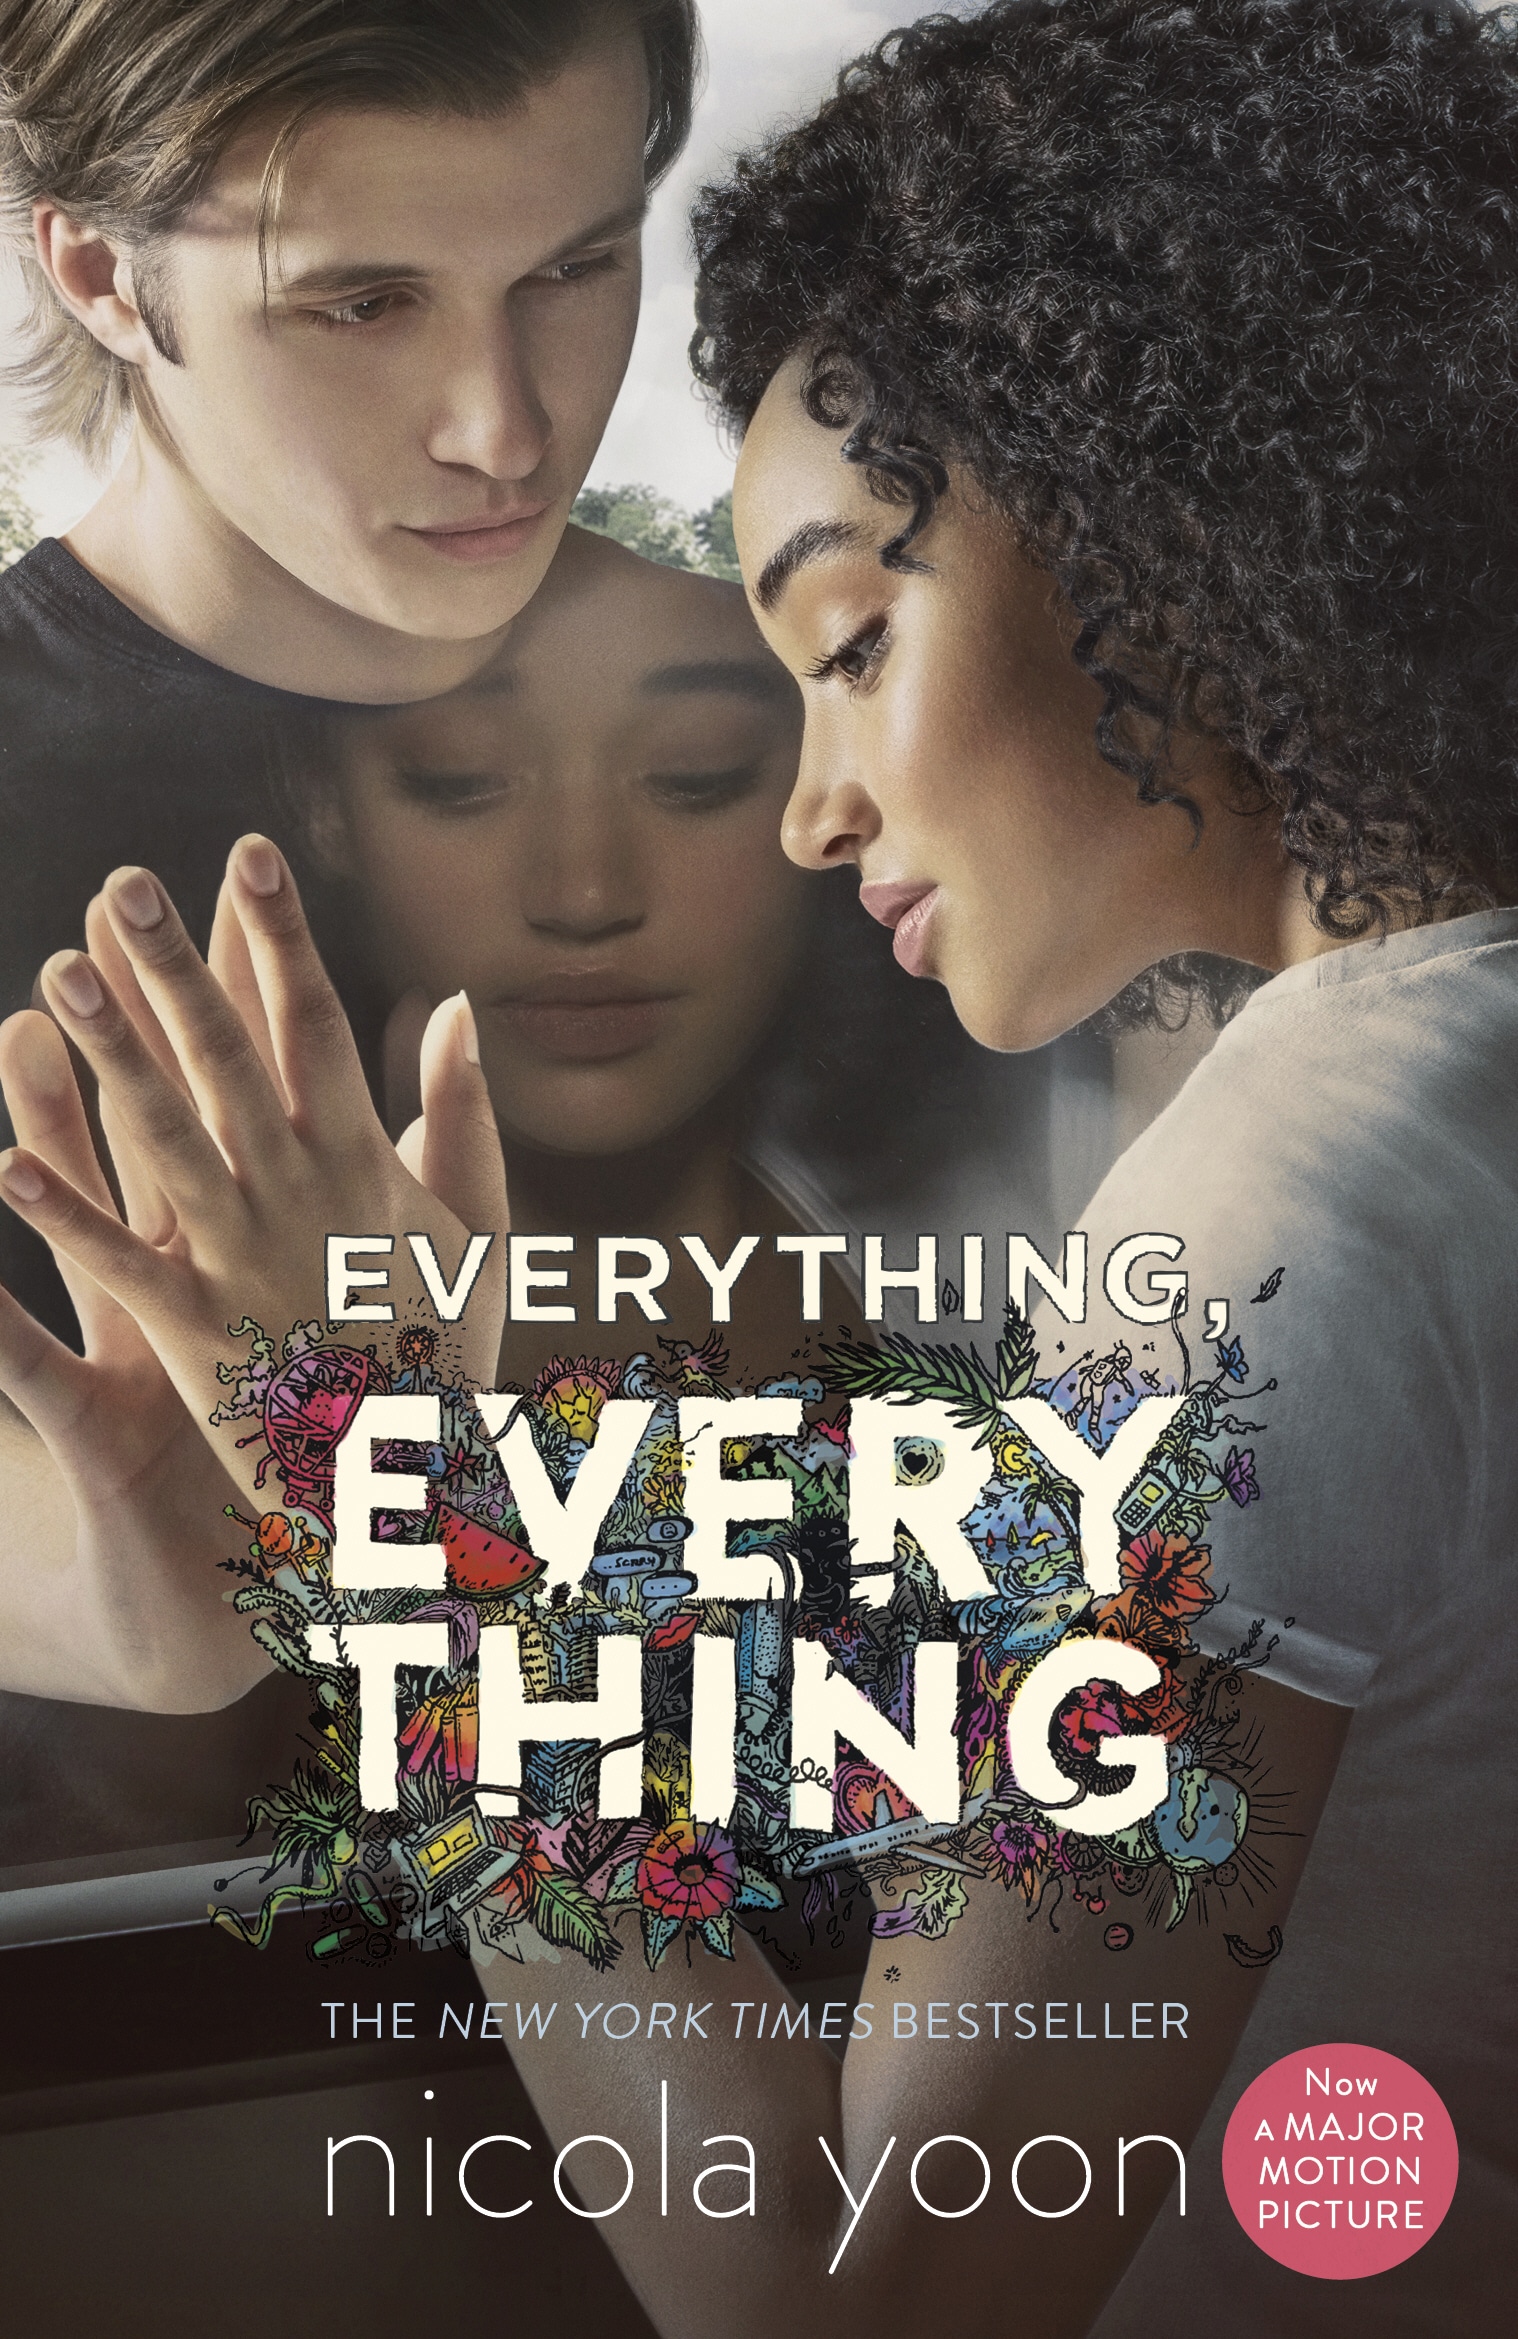 Book “Everything, Everything” by Nicola Yoon — April 6, 2017